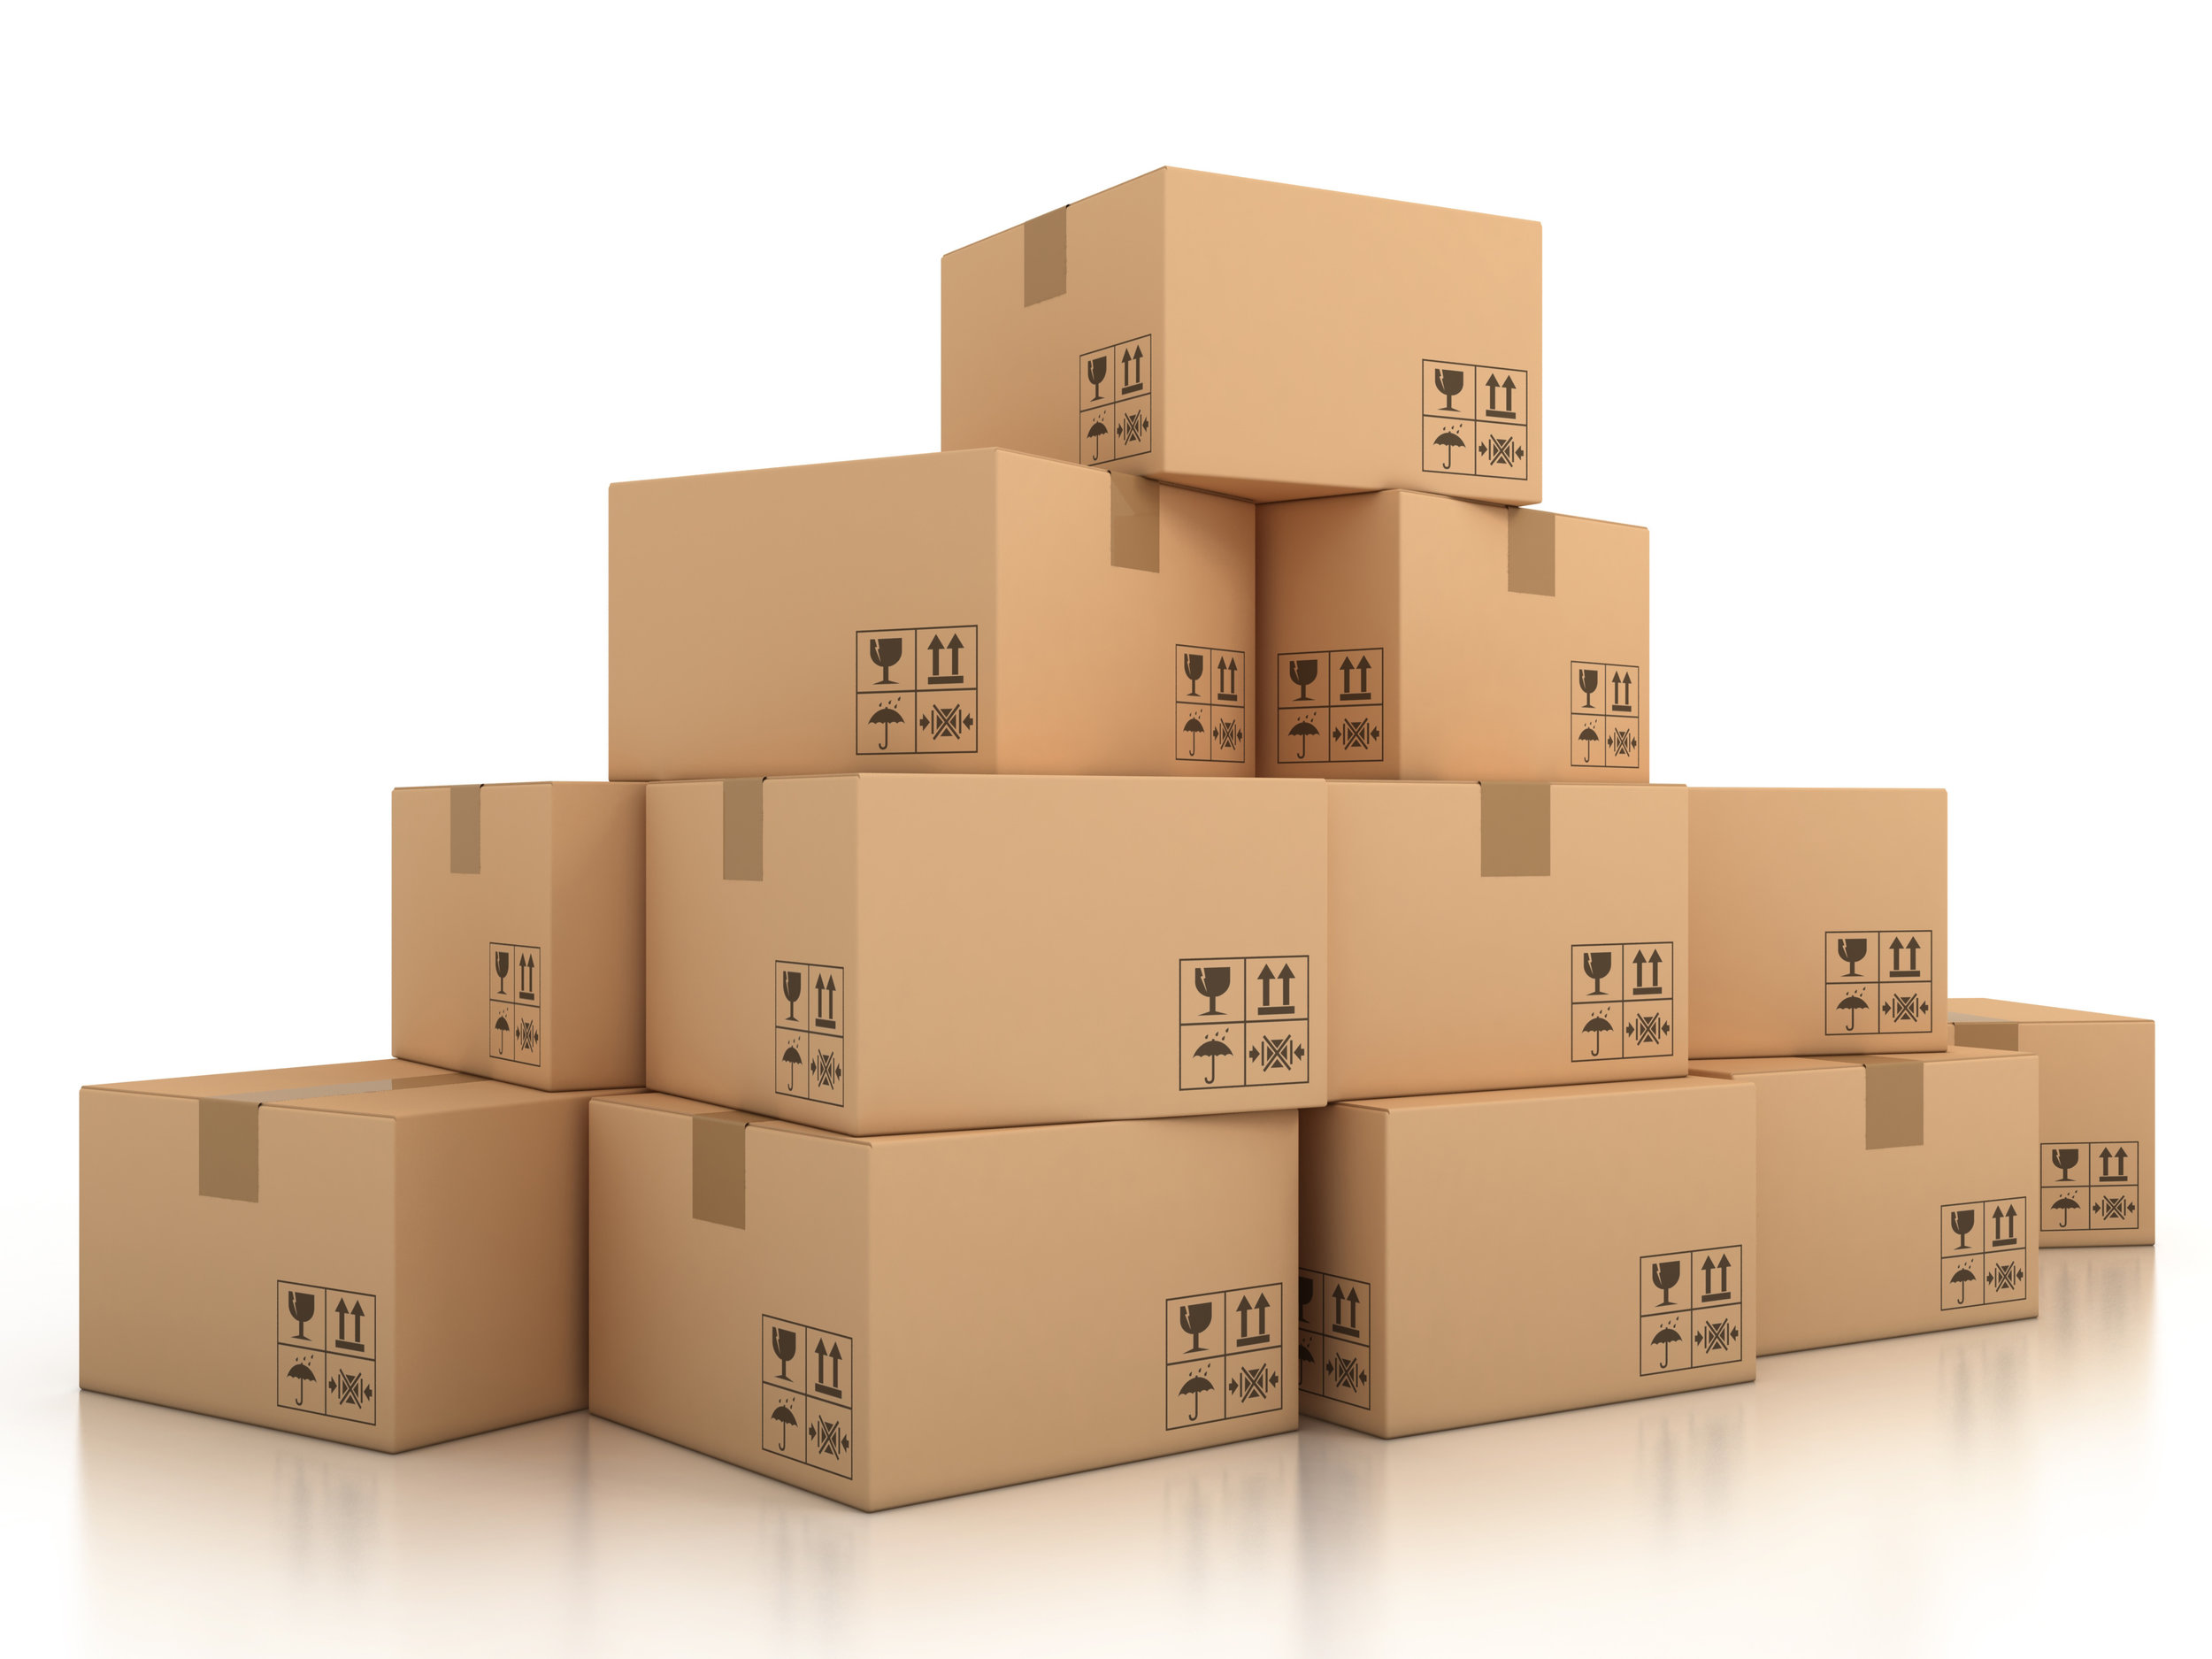 Packing and Storage Services